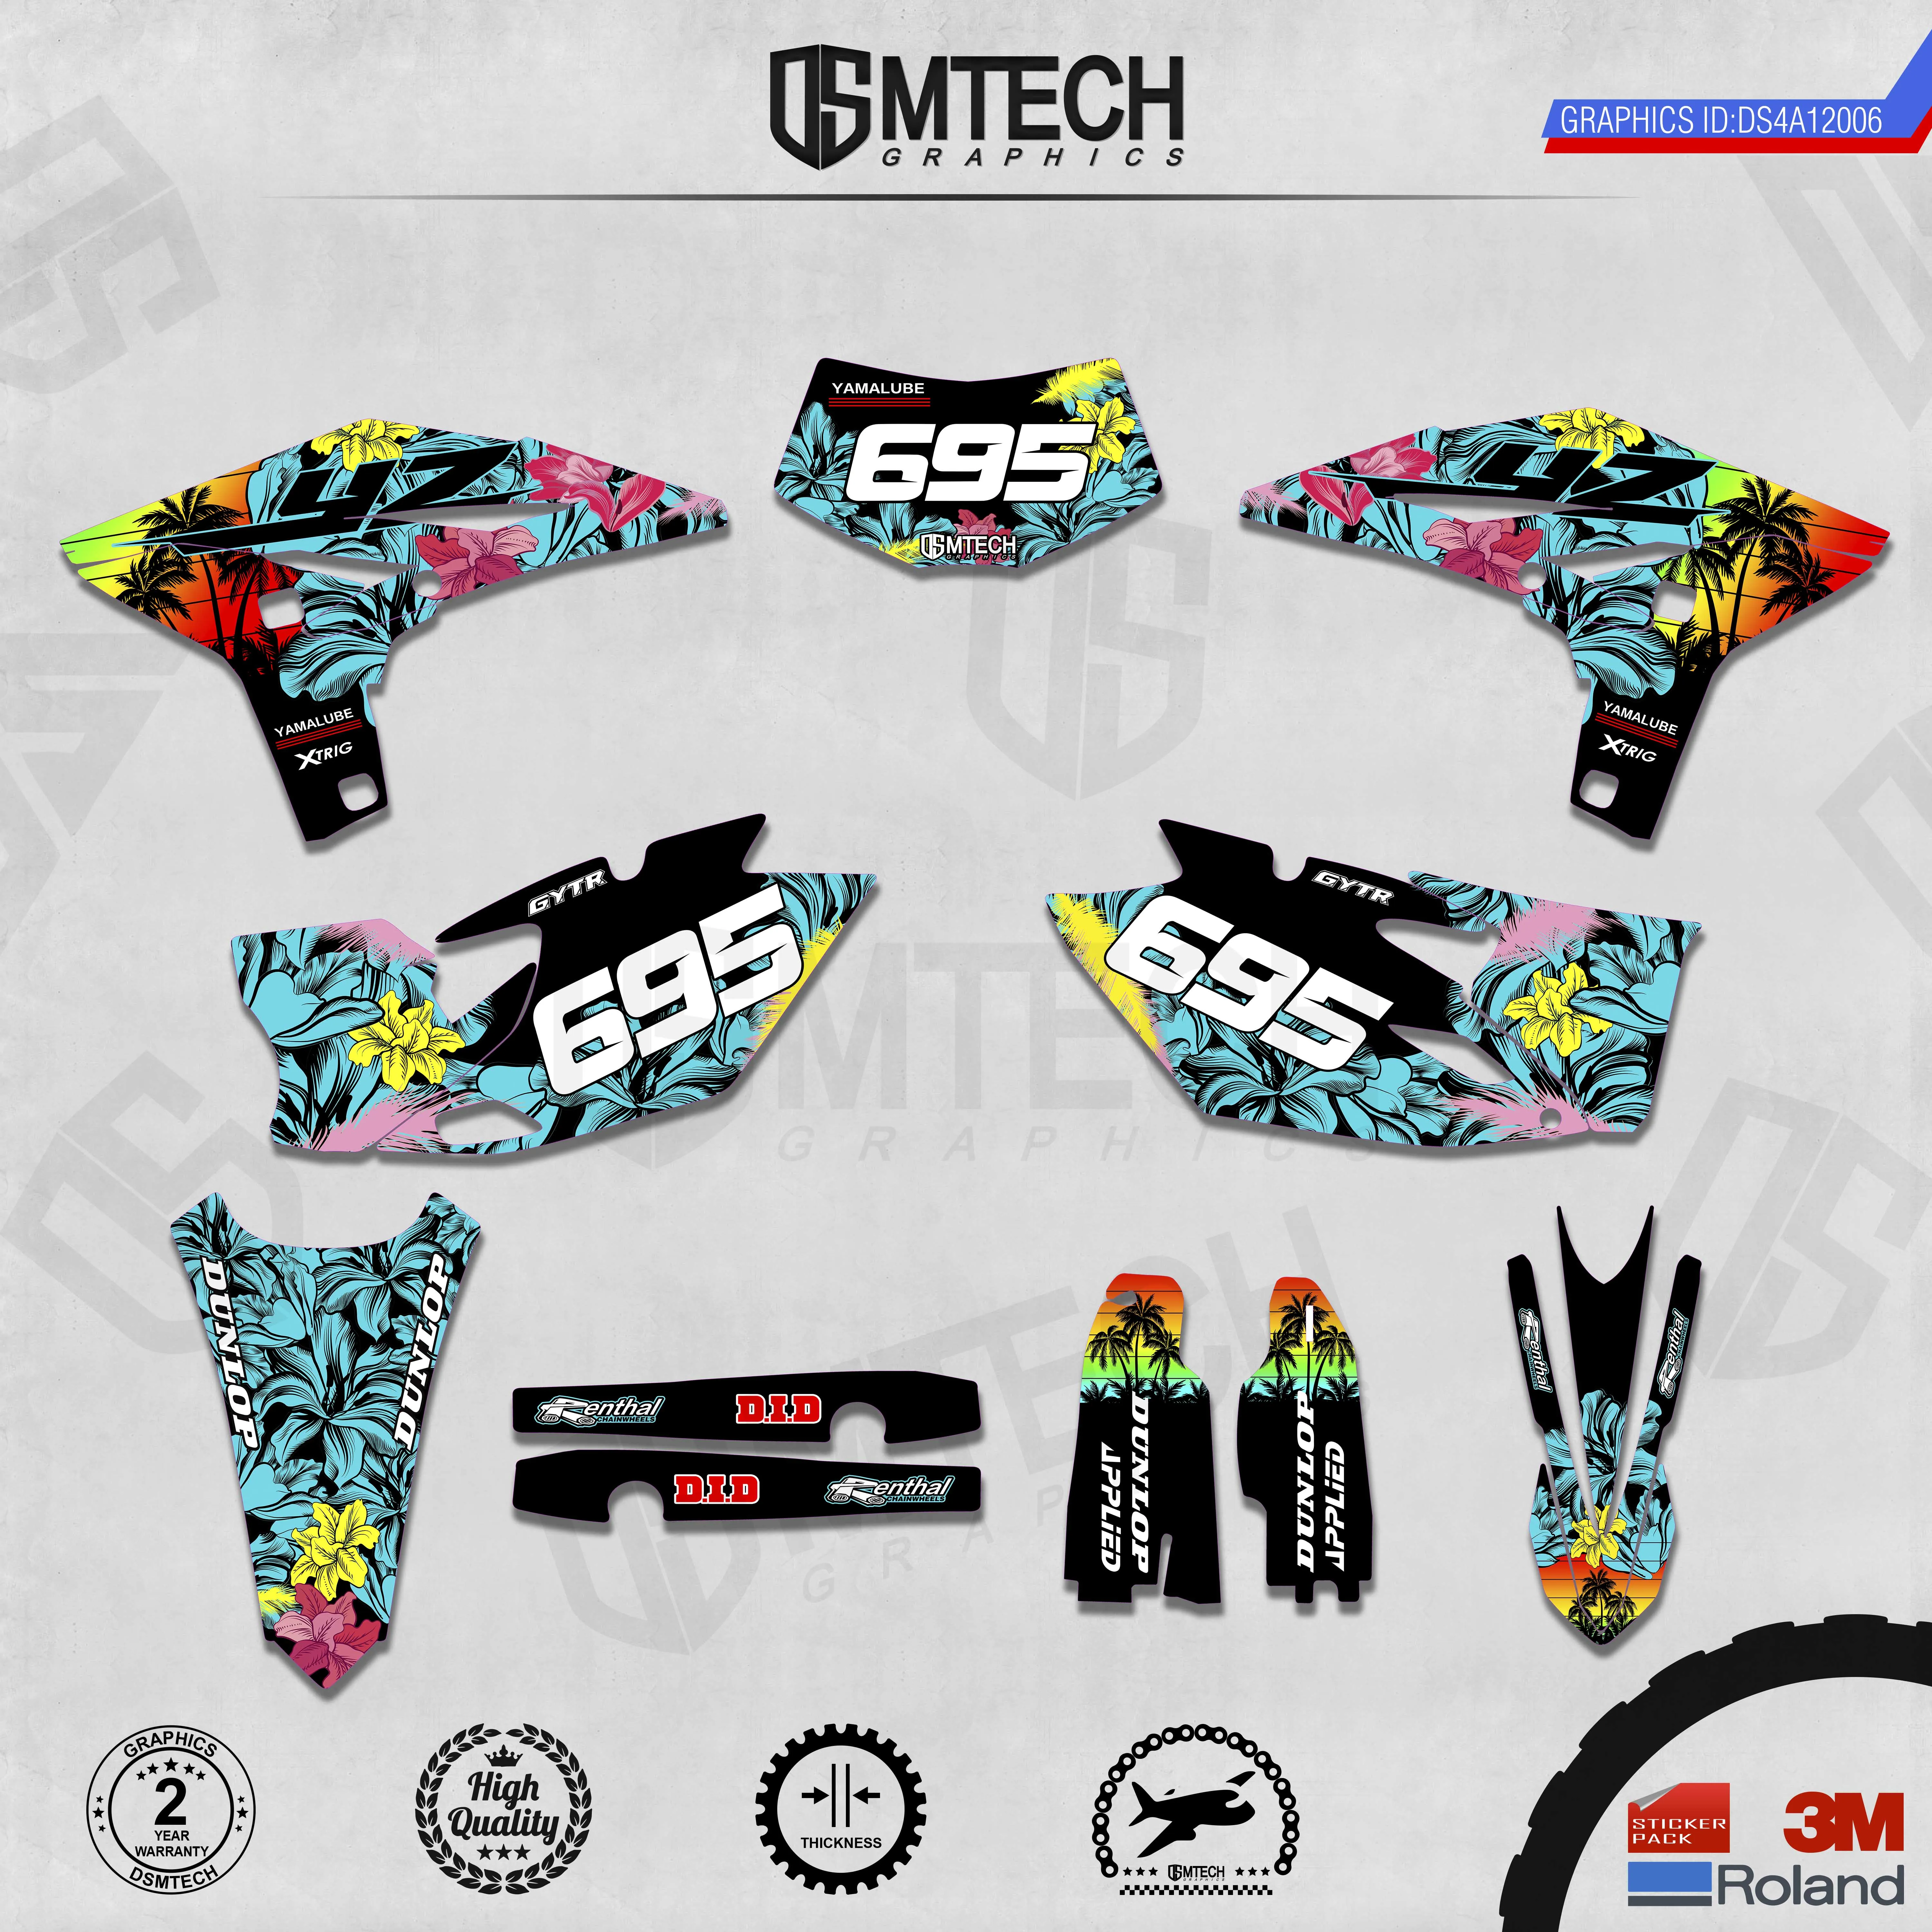 DSMTECH Customized Team Graphics Backgrounds Decals 3M Custom Stickers For  WRF450 Two Stroke 2012-2015  006